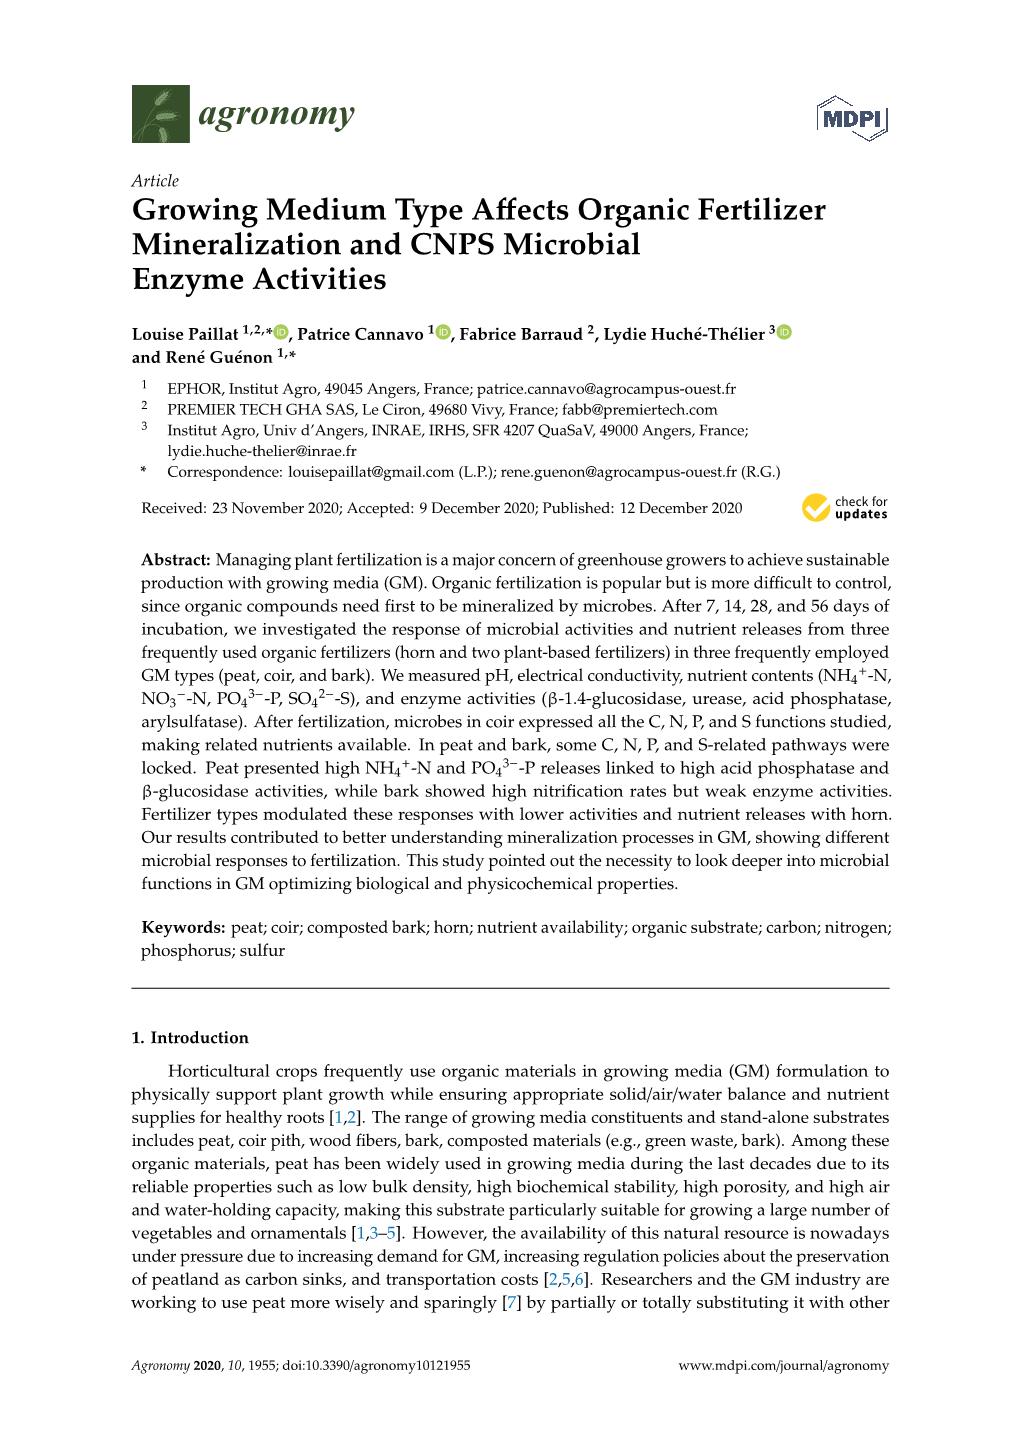 Growing Medium Type Affects Organic Fertilizer Mineralization and CNPS Microbial Enzyme Activities